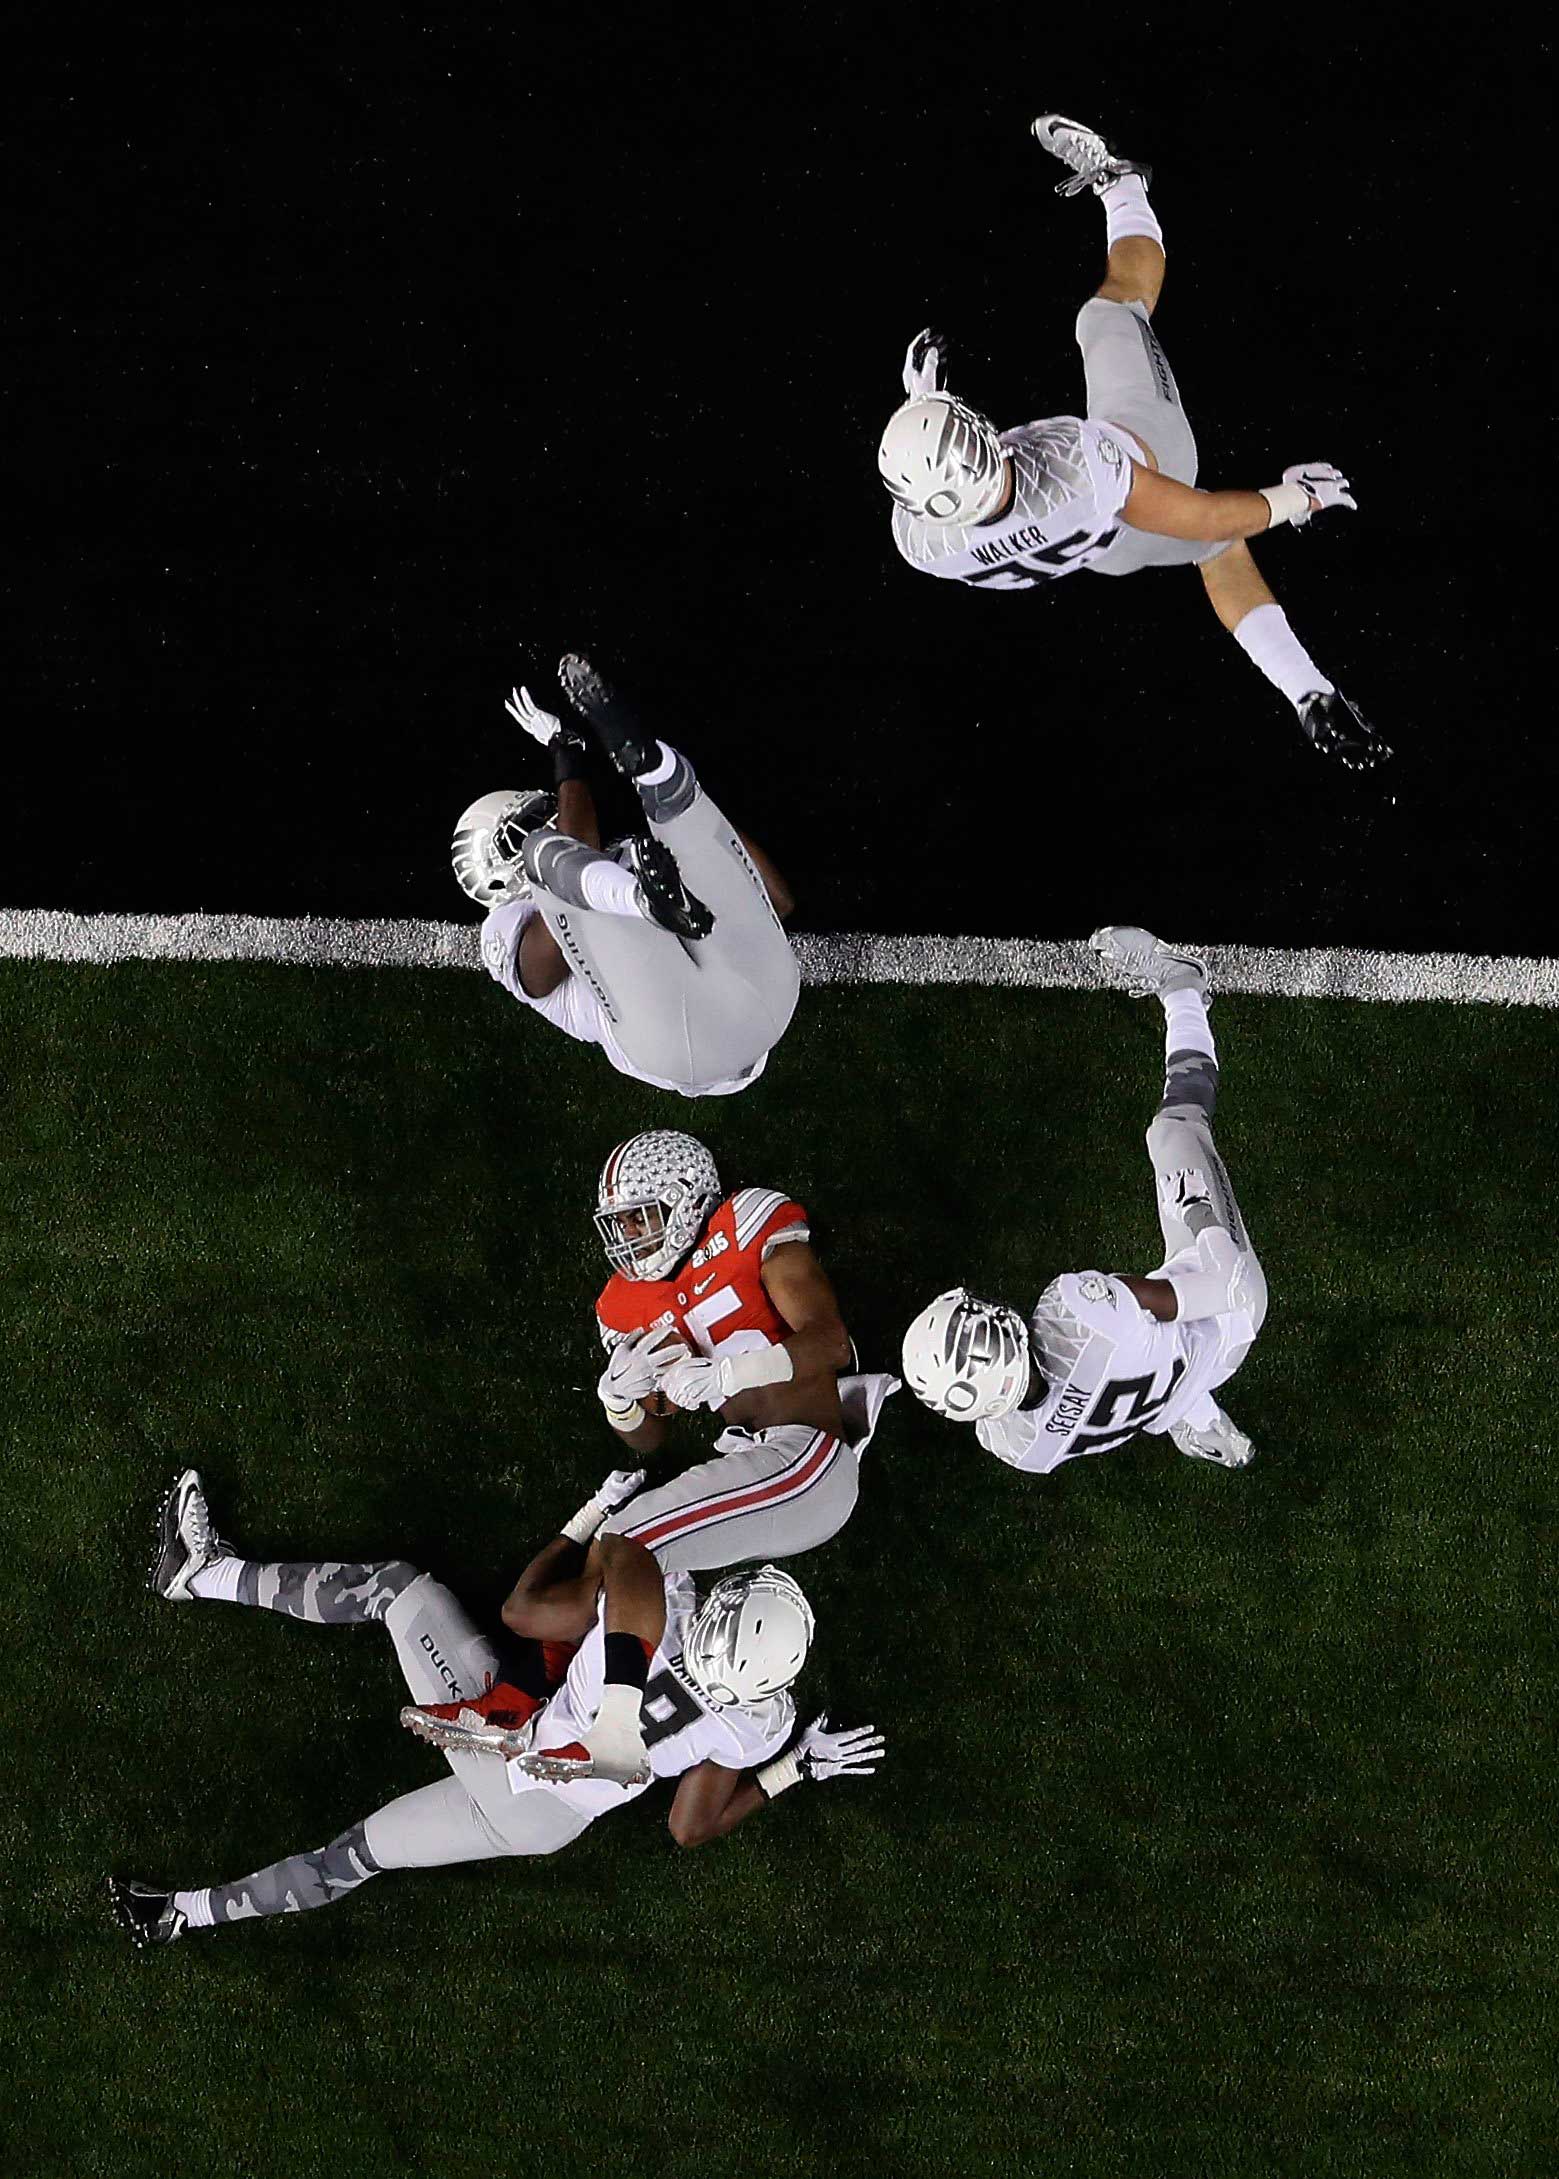 Ohio State's Ezekiel Elliott (15) is stopped short of the goal line during the NCAA college football playoff championship game against Oregon on Jan. 12, 2015, in Arlington, Texas.